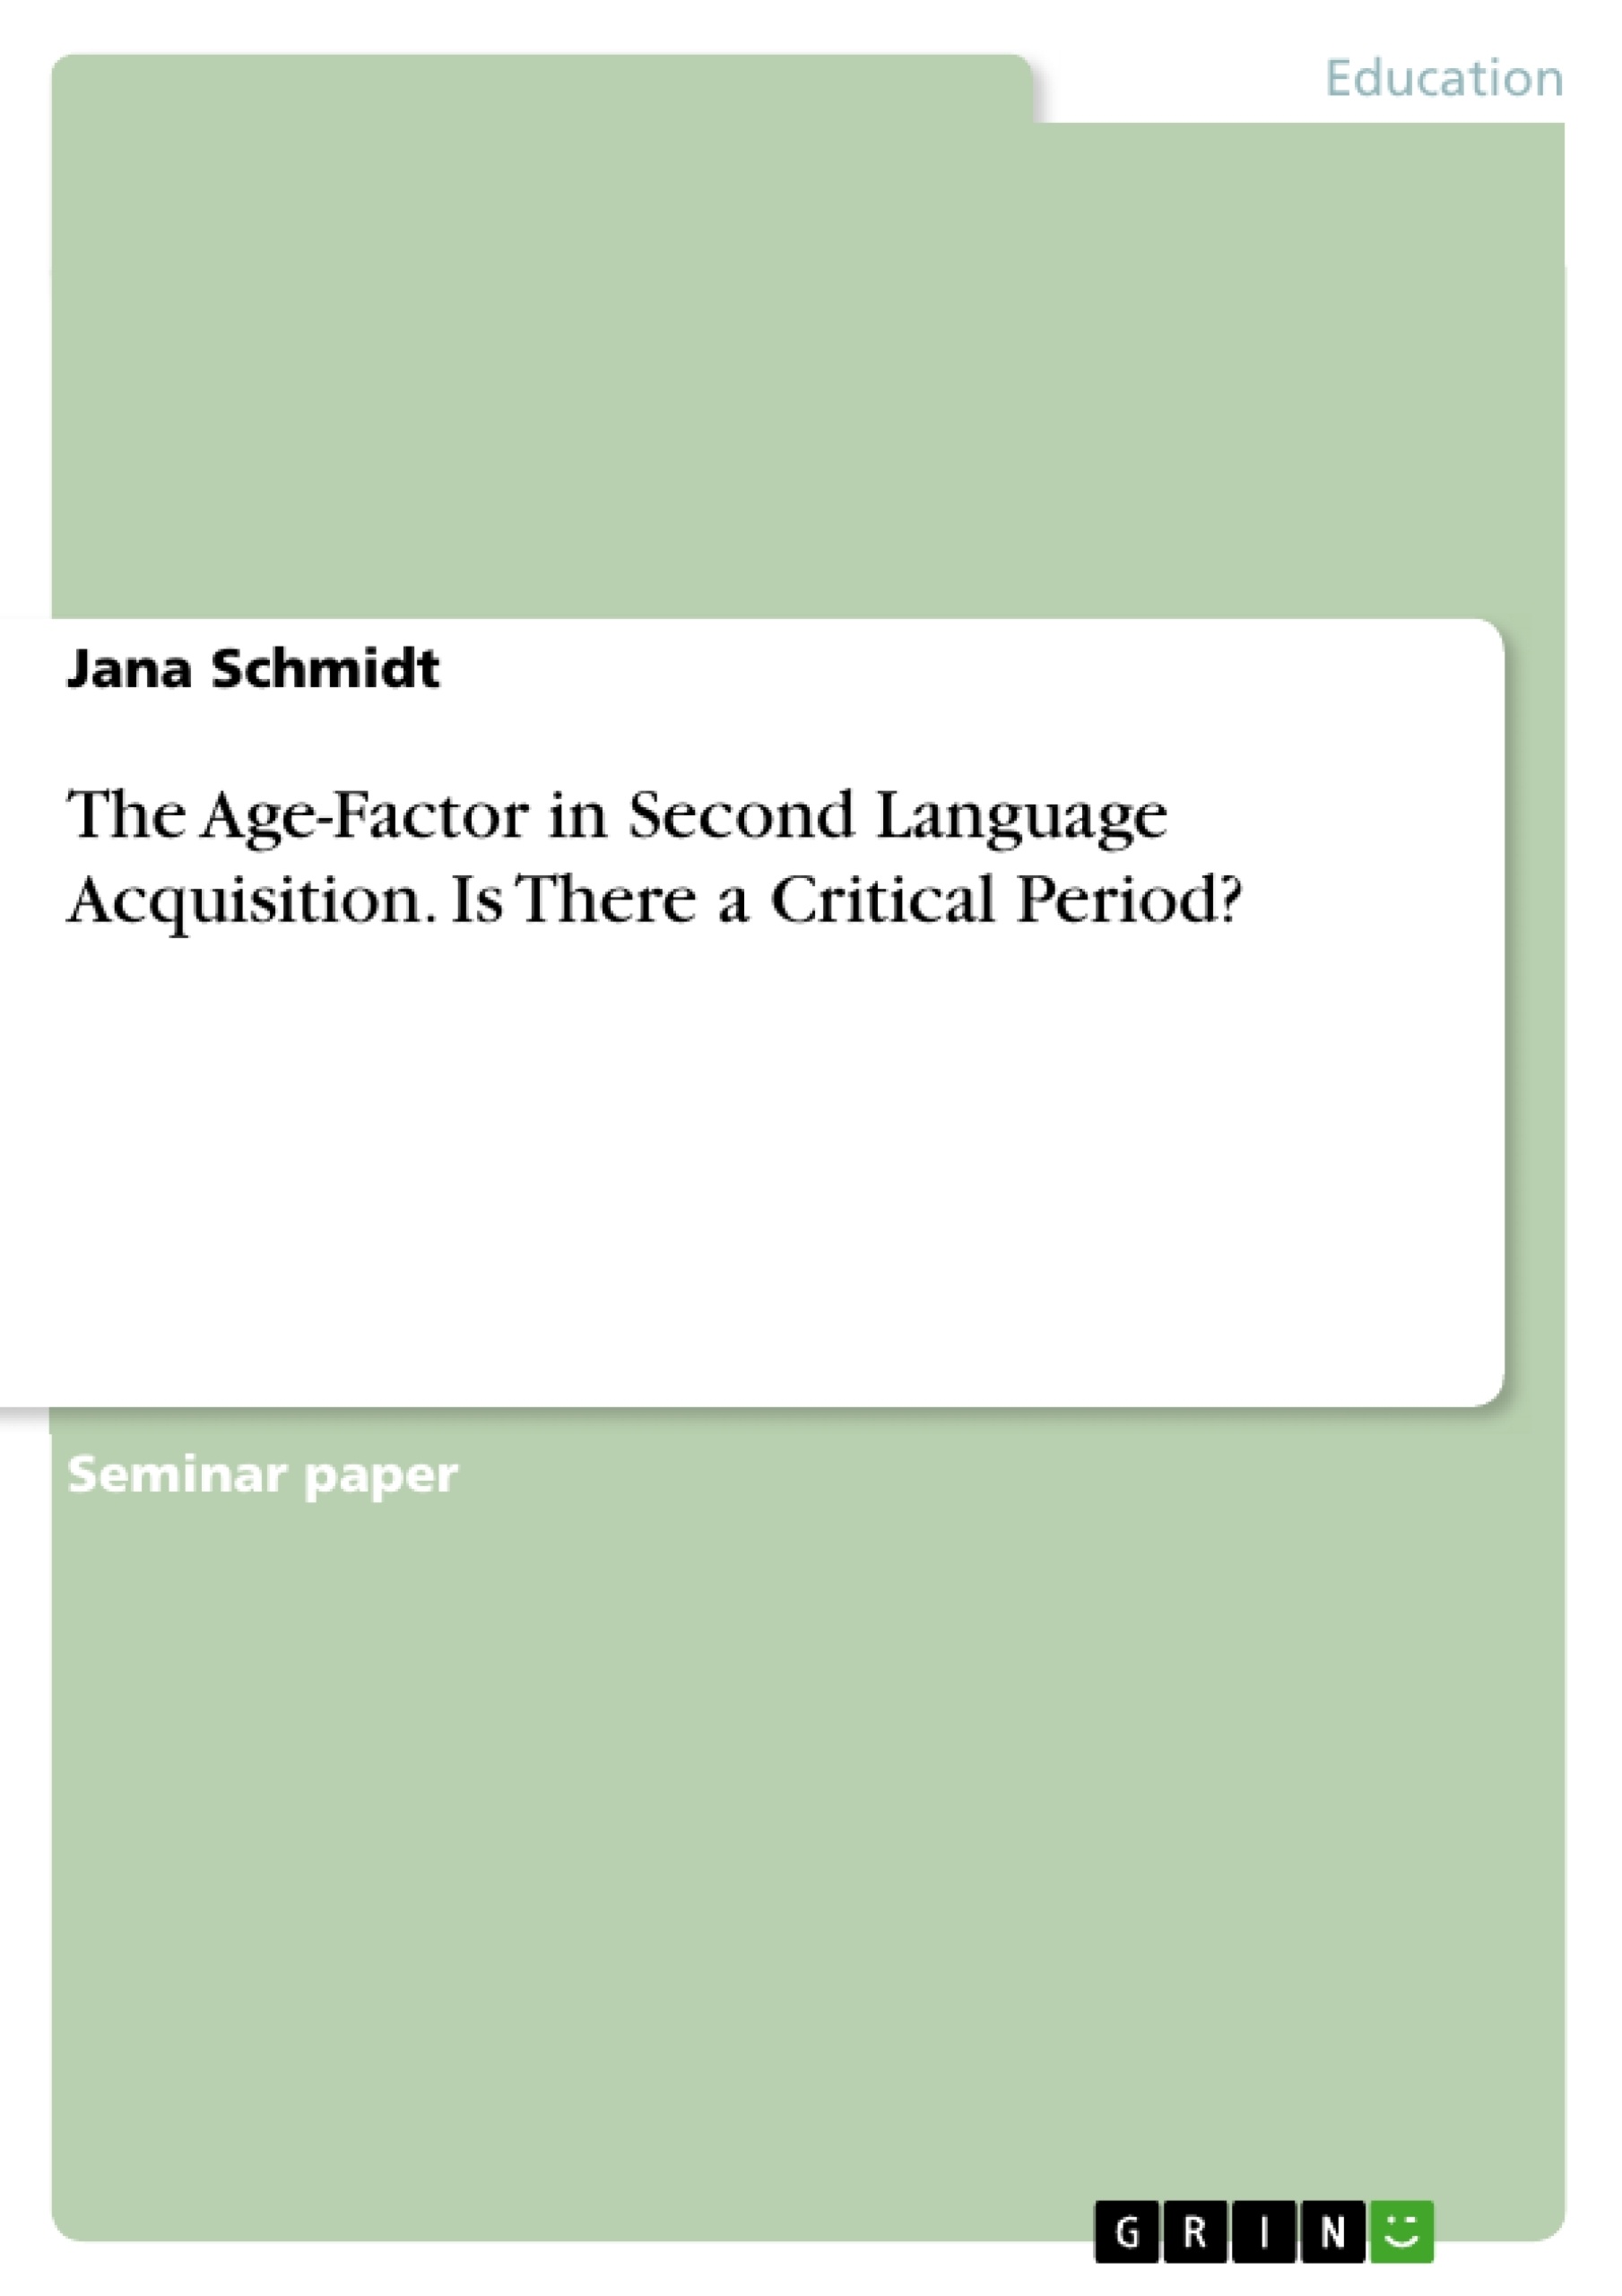 Titre: The Age-Factor in Second Language Acquisition.  Is There a Critical Period?